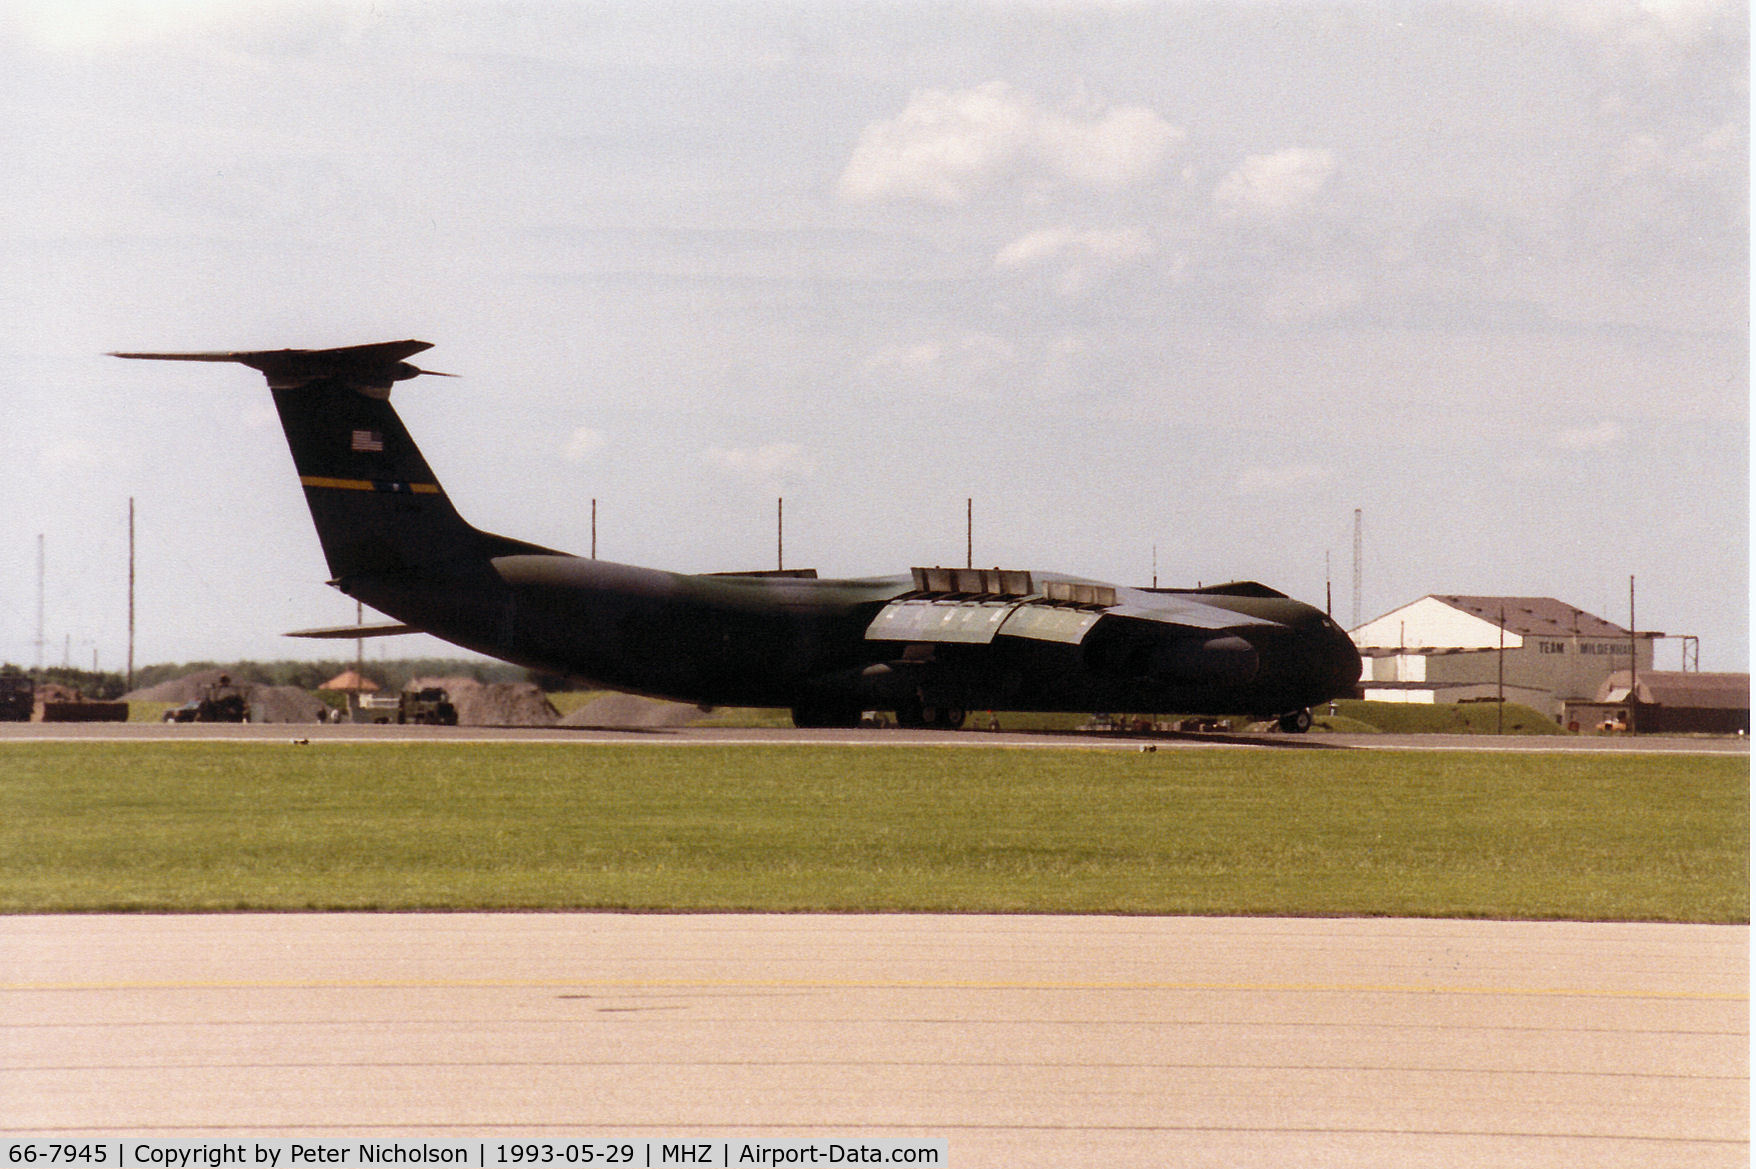 66-7945, 1966 Lockheed C-141B Starlifter C/N 300-6237, C-141B Starlifter of the 437th Military Airlift Wing at Charleston AFB landing during the 1993 RAF Mildenhall Air Fete.